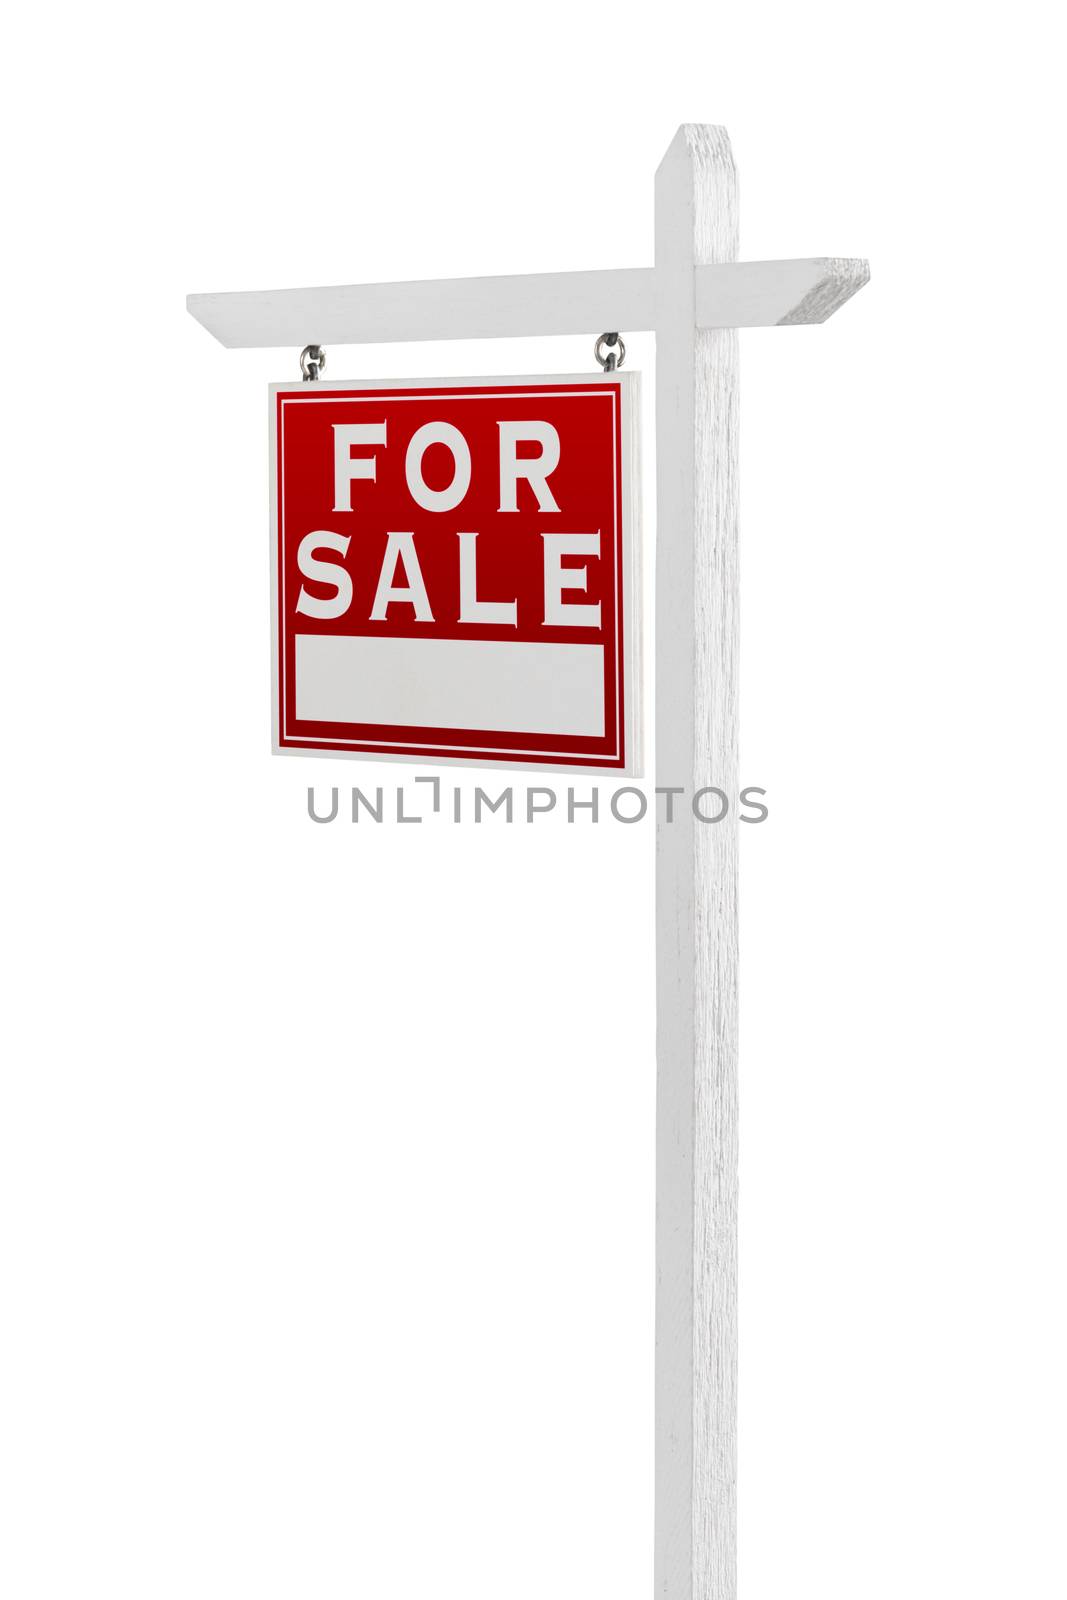 Left Facing For Sale Real Estate Sign Isolated on a White Backgr by Feverpitched